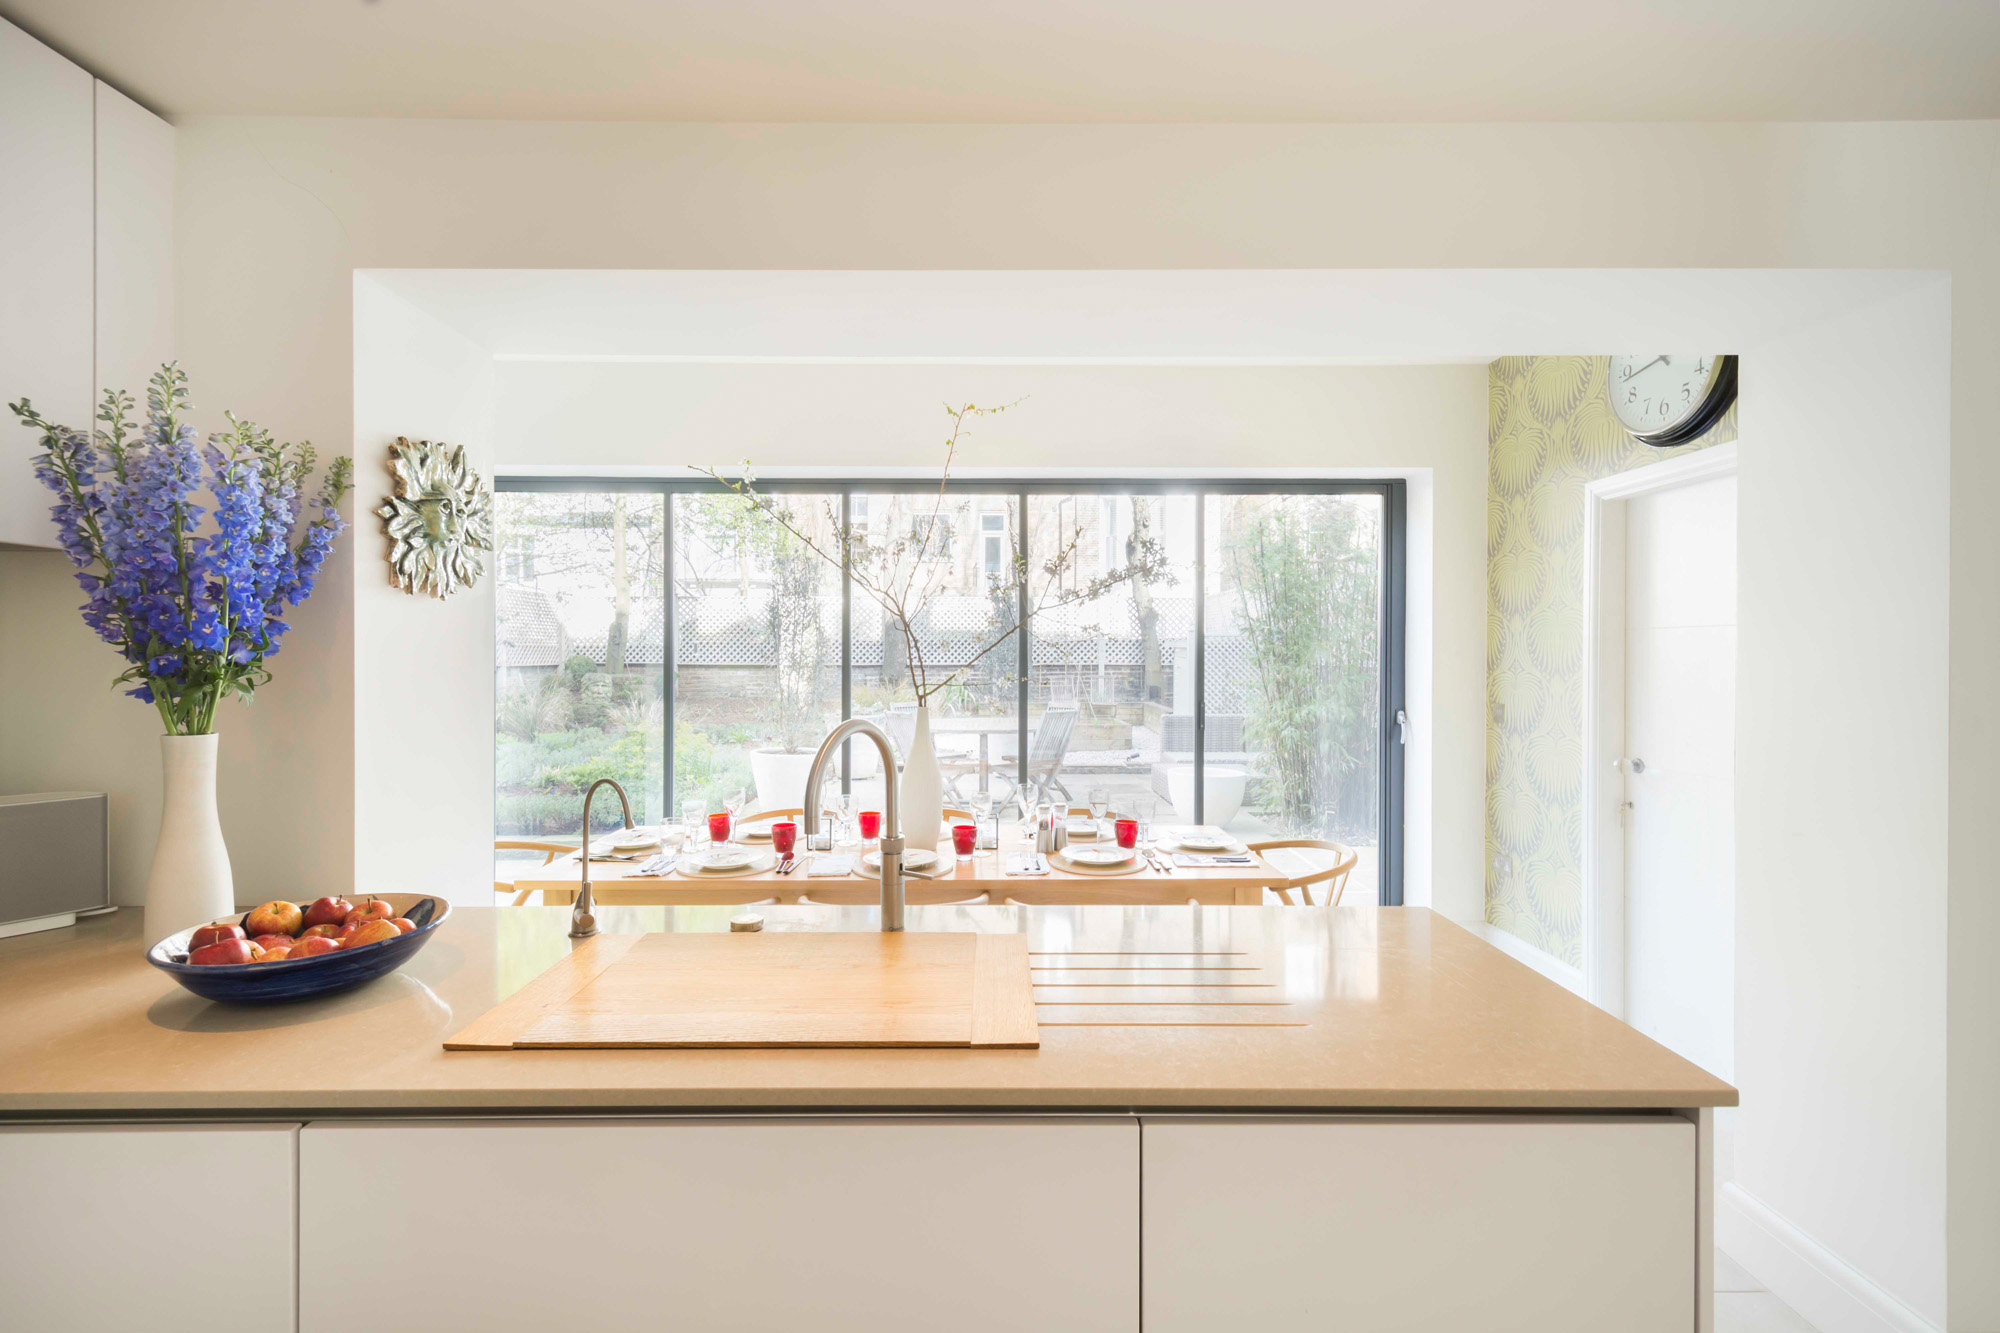 For Sale: Cambridge Gardens North Kensington W10 modern kitchen and dining room